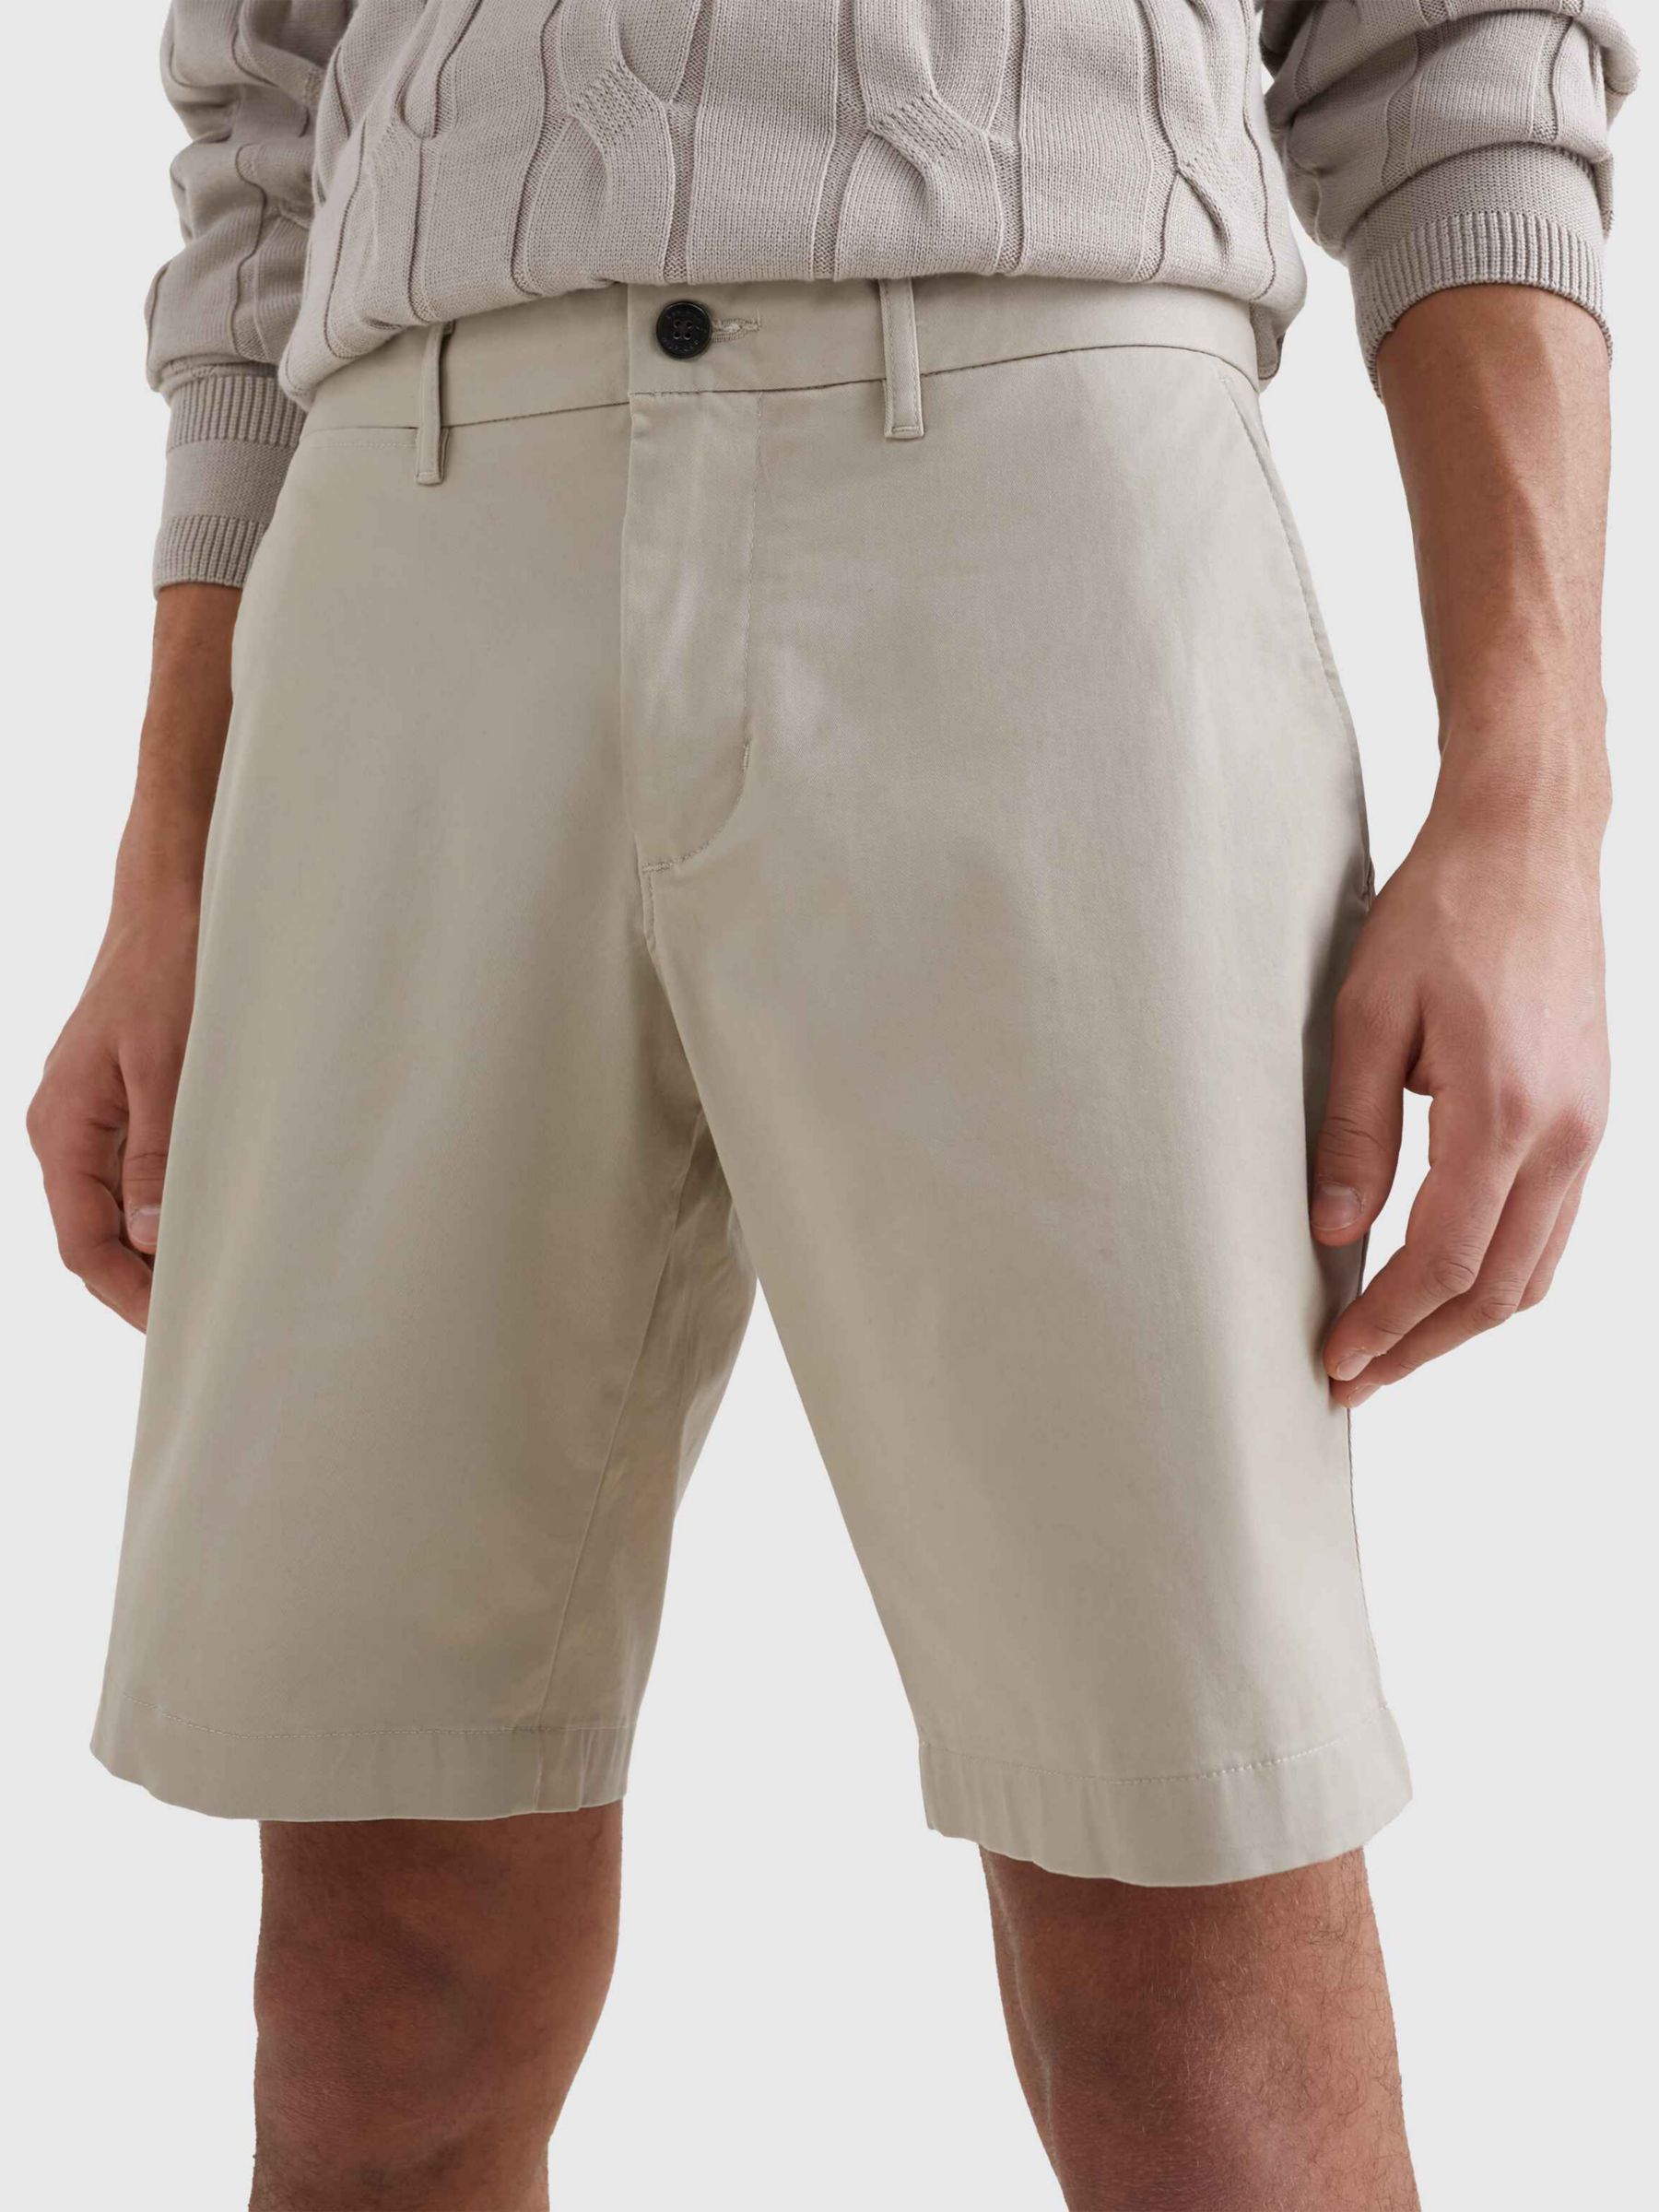 pludselig Vandt Store Tommy Hilfiger Brooklyn Chino Shorts, Stone at John Lewis & Partners